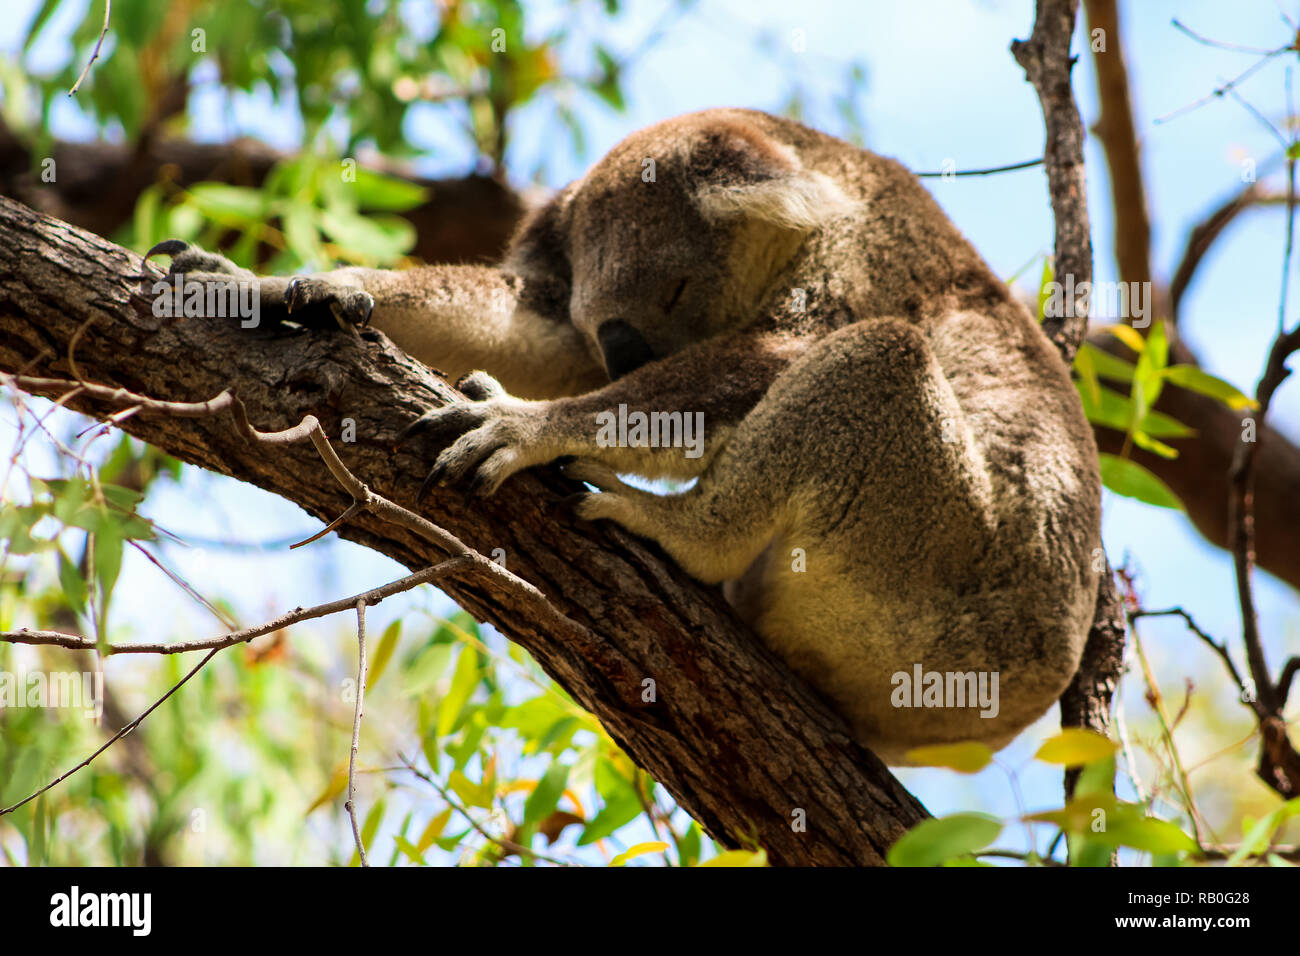 Sleeping Australian koala high up in a tree during spring time as spotted during a hike on Magnetic Island (Townsville, Queensland, Australia) Stock Photo